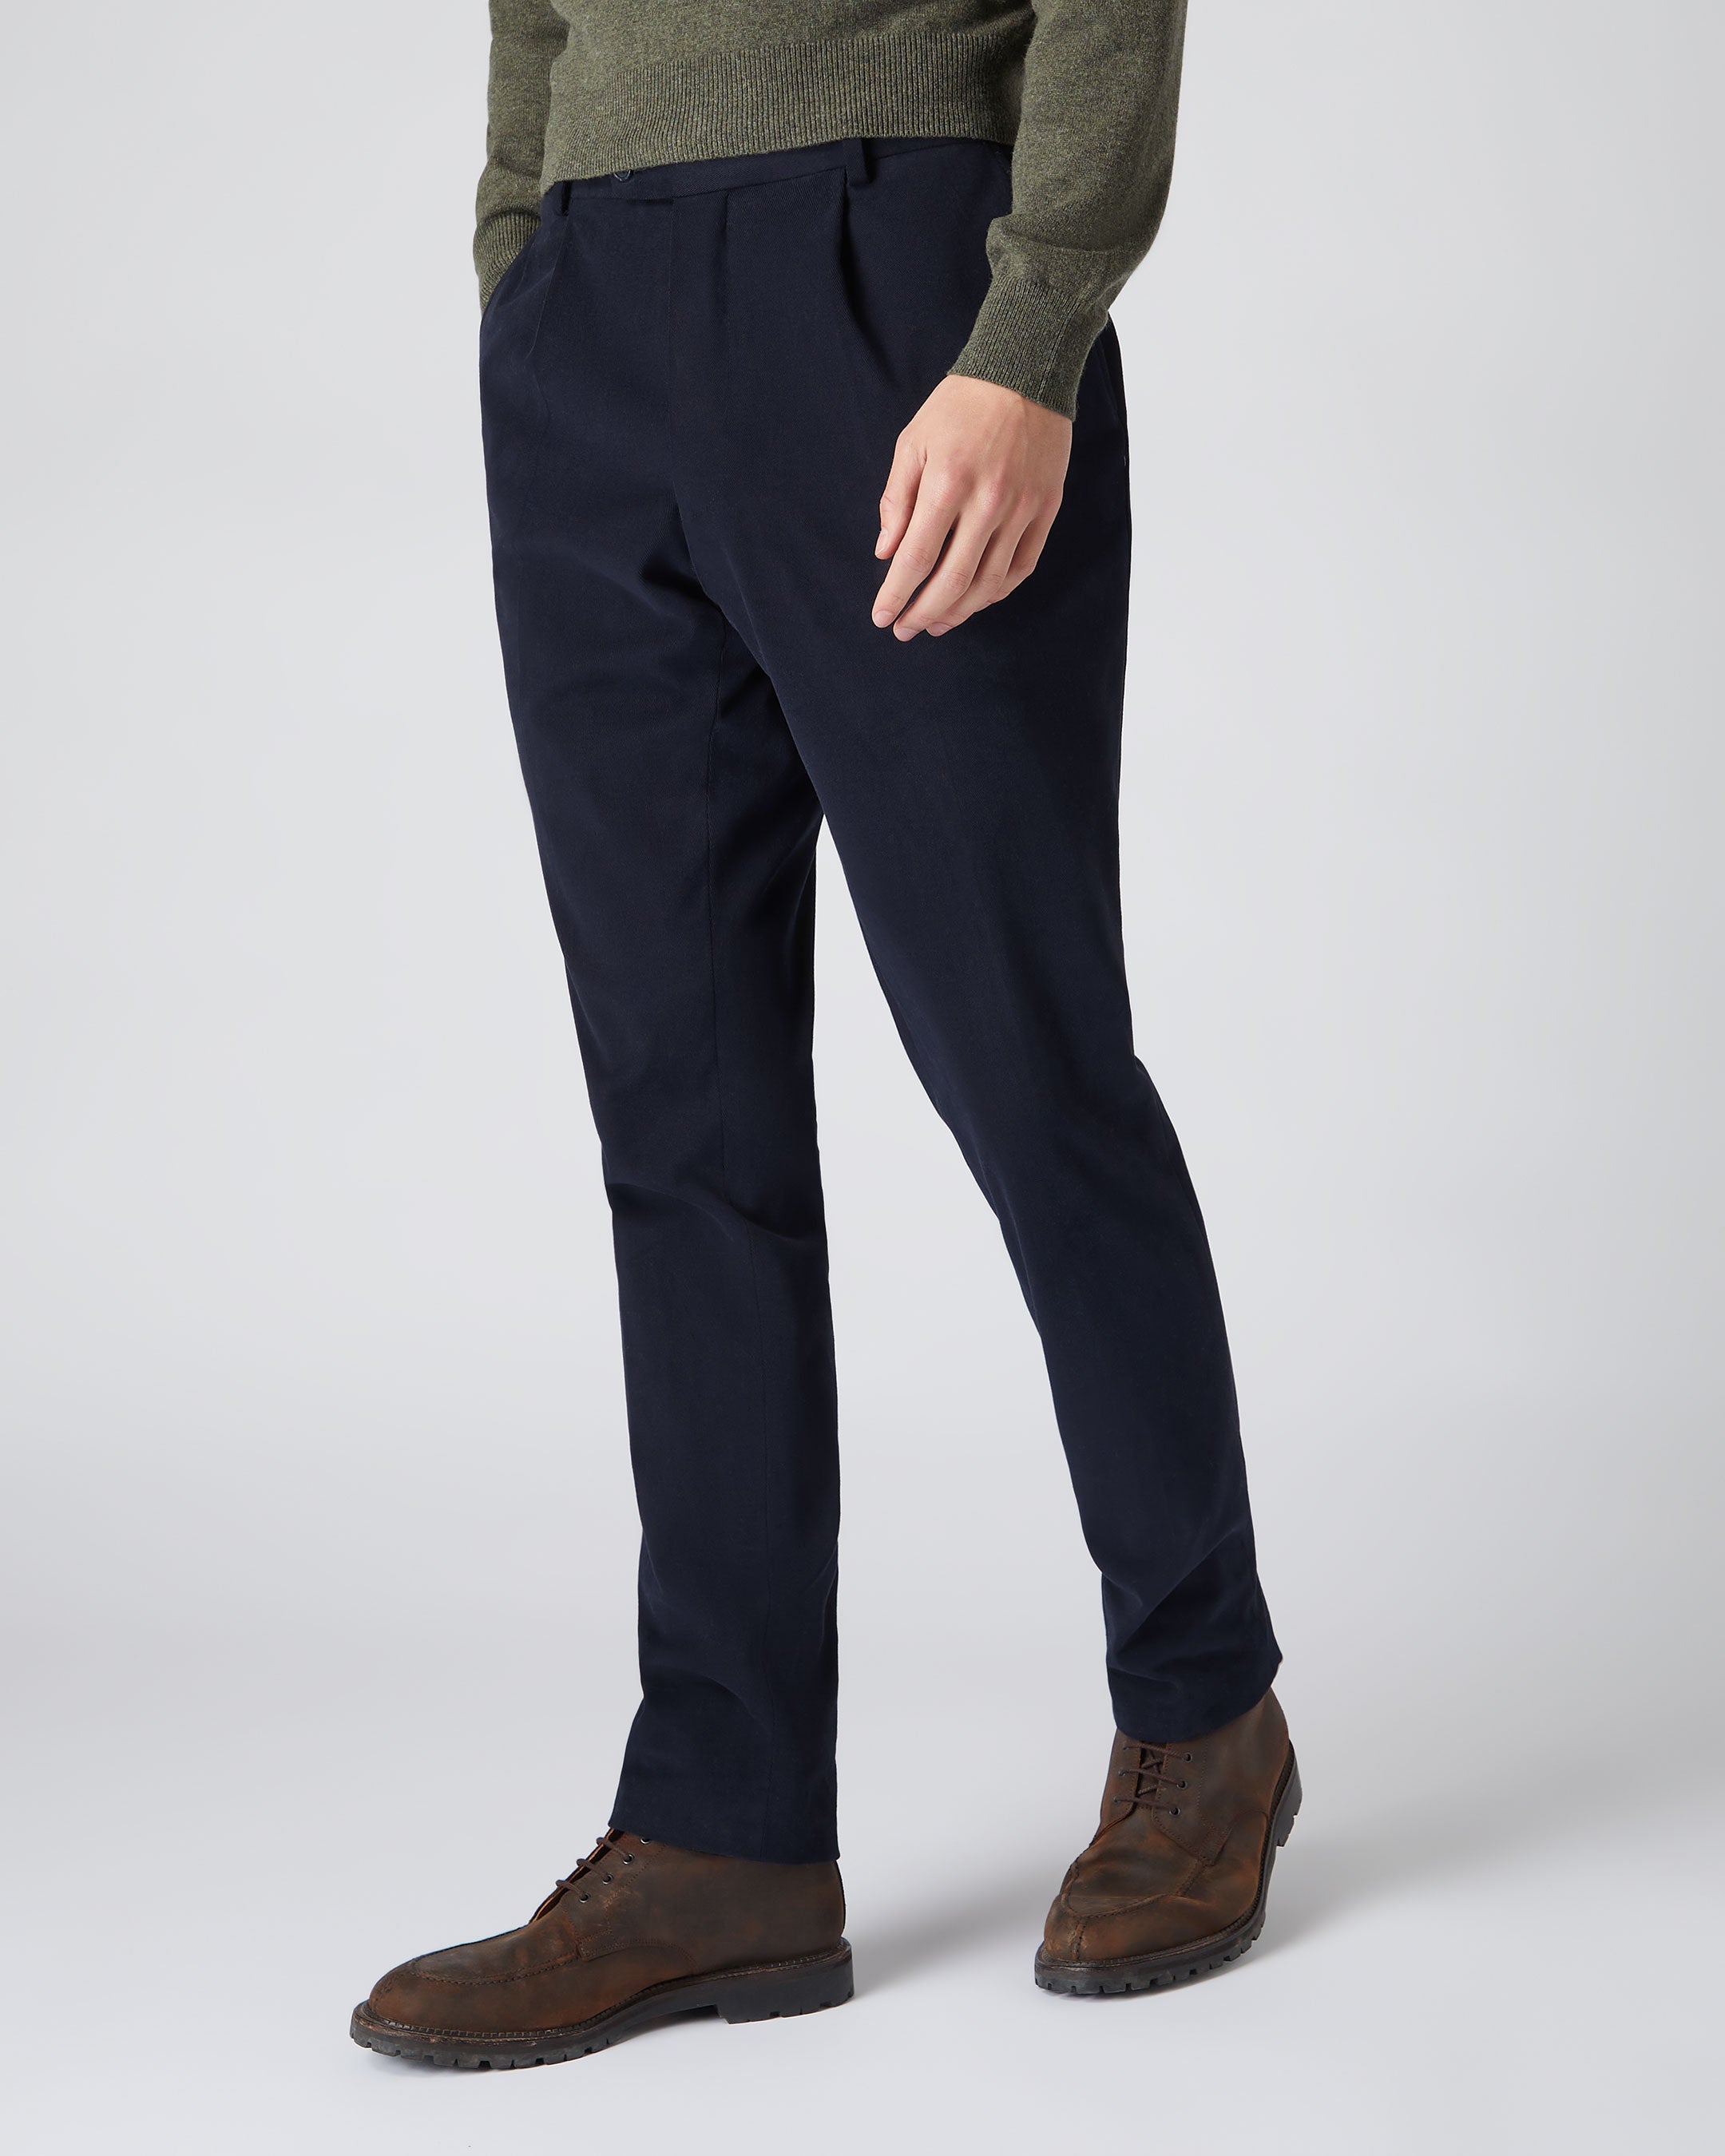 Navy Wool Dress Pant - Custom Fit Tailored Clothing